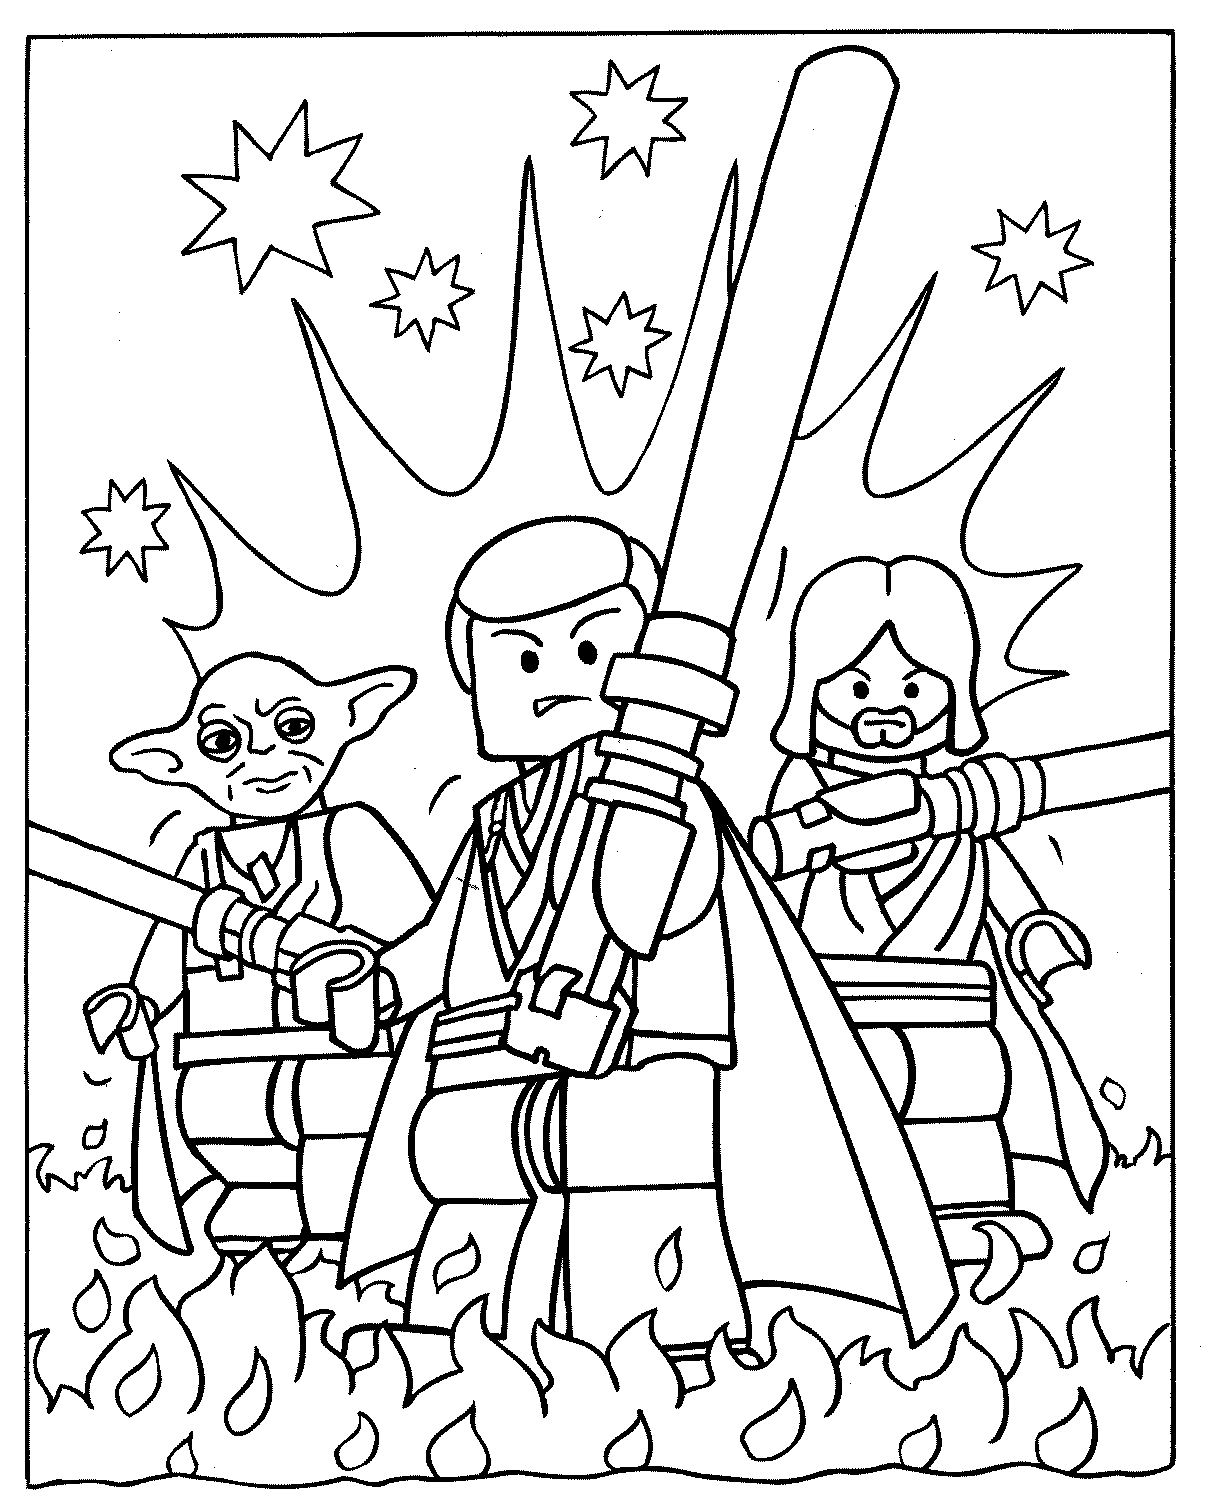  Lego Star Wars coloring pages | coloring pages for boys | #4